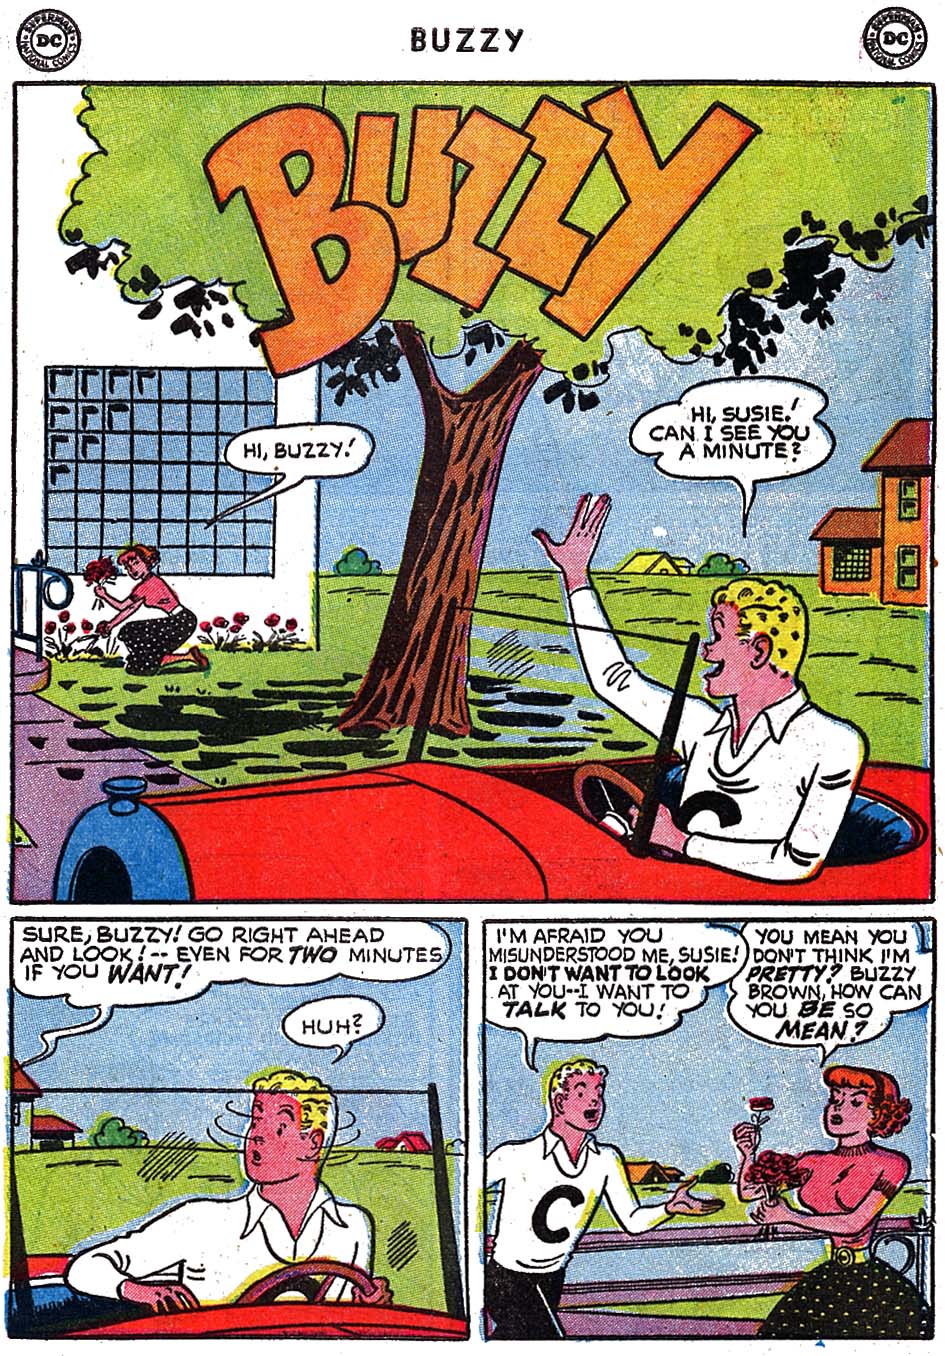 Read online Buzzy comic -  Issue #55 - 11